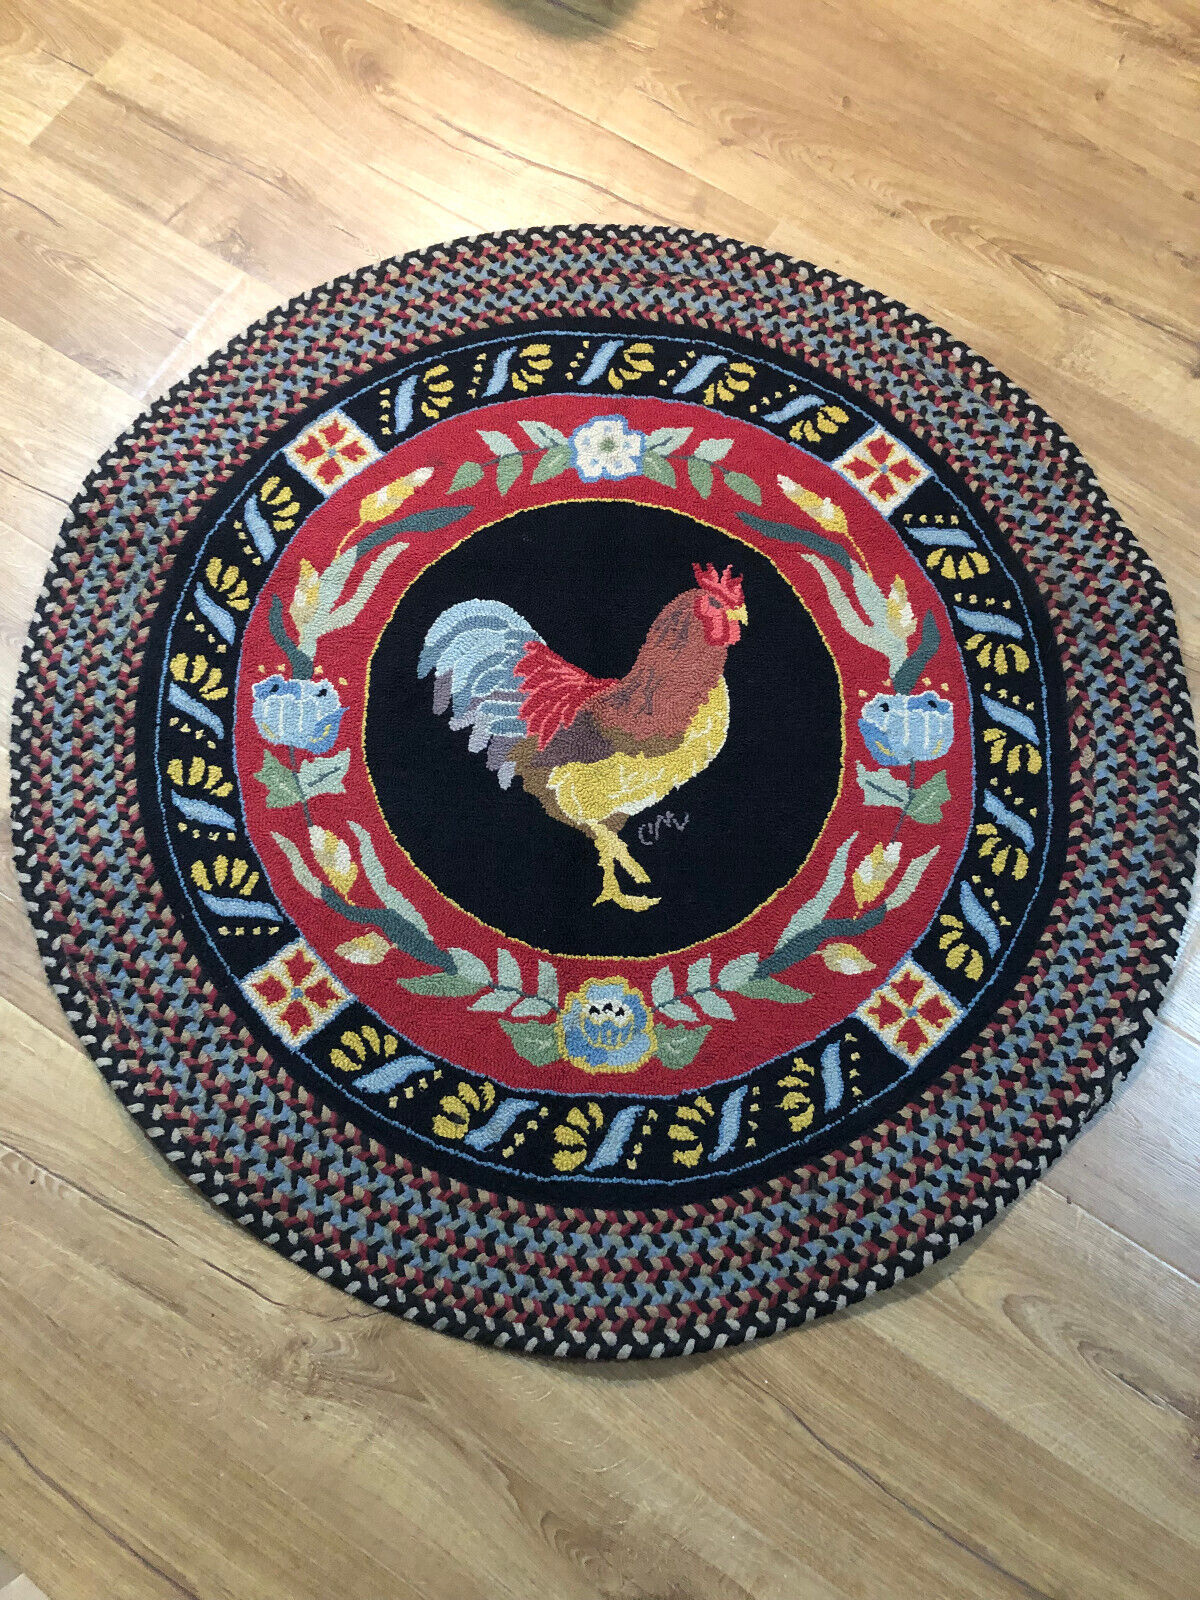 Claire Murray Hand Hooked Rooster 46 Inch Round Rug